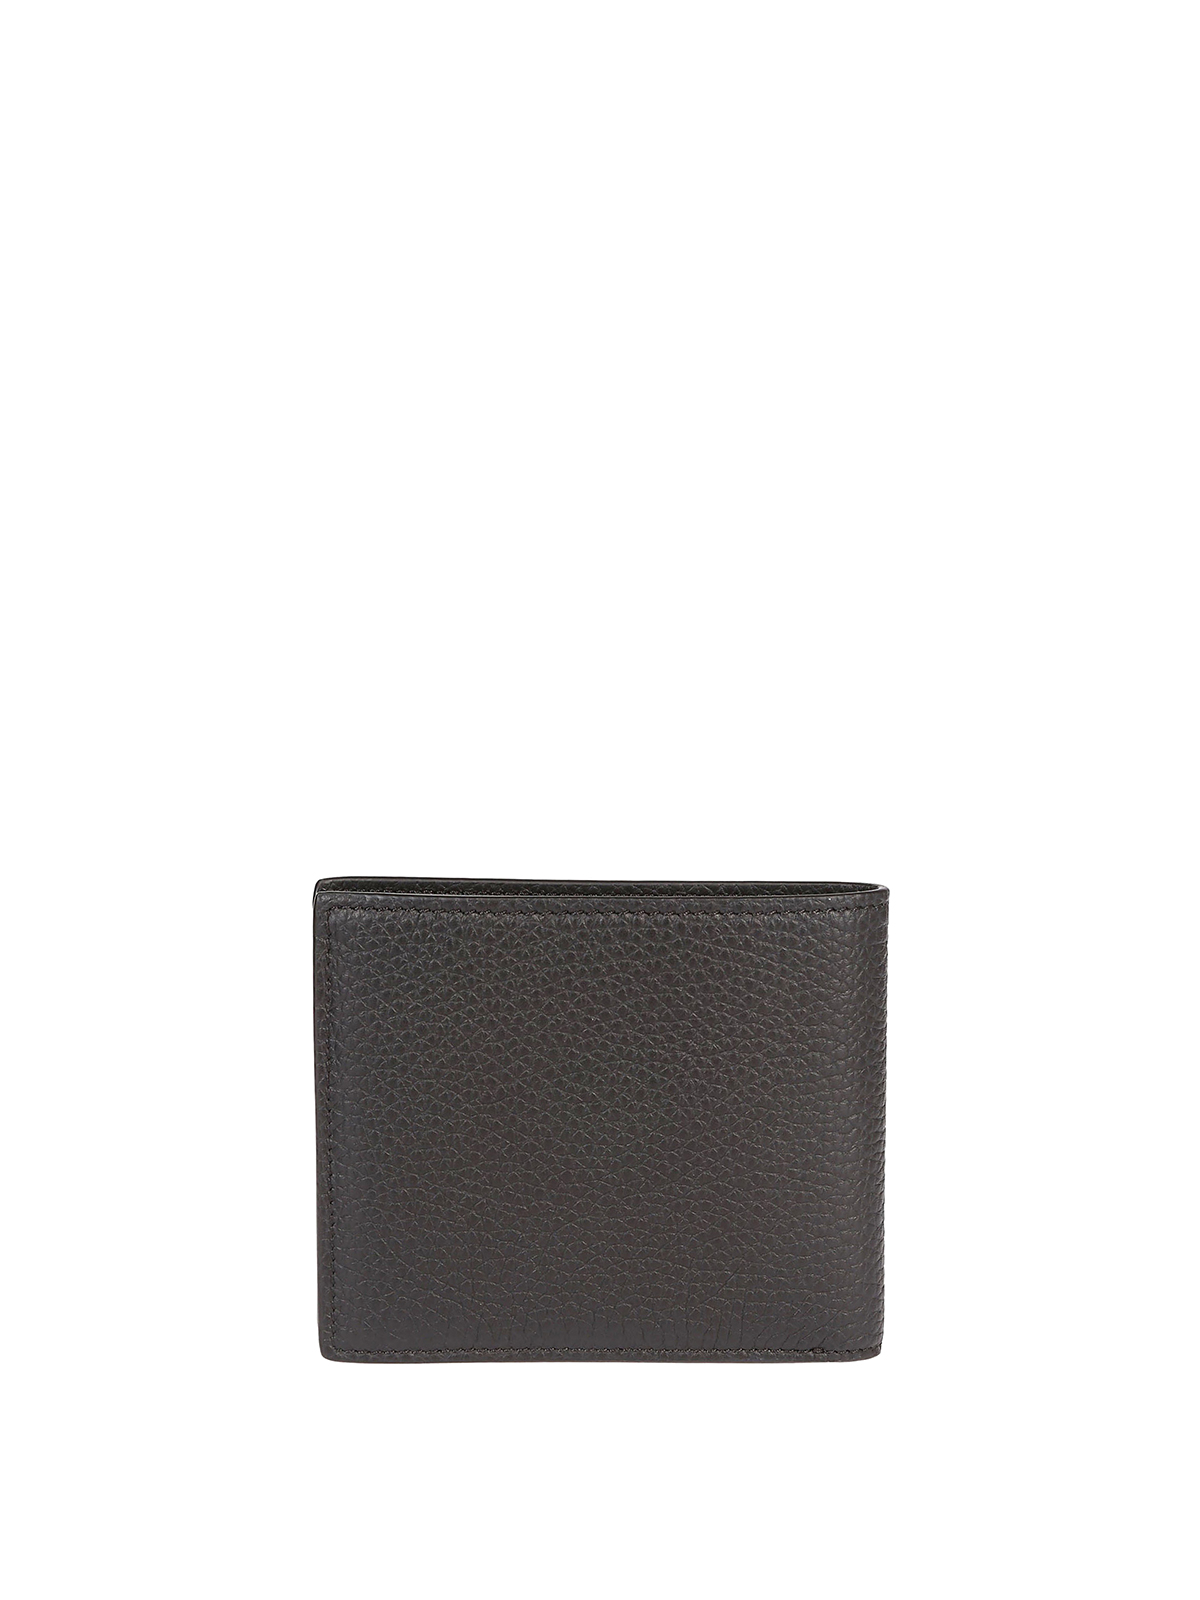 Wallets & purses Tom Ford - Black grainy leather bifold wallet ...